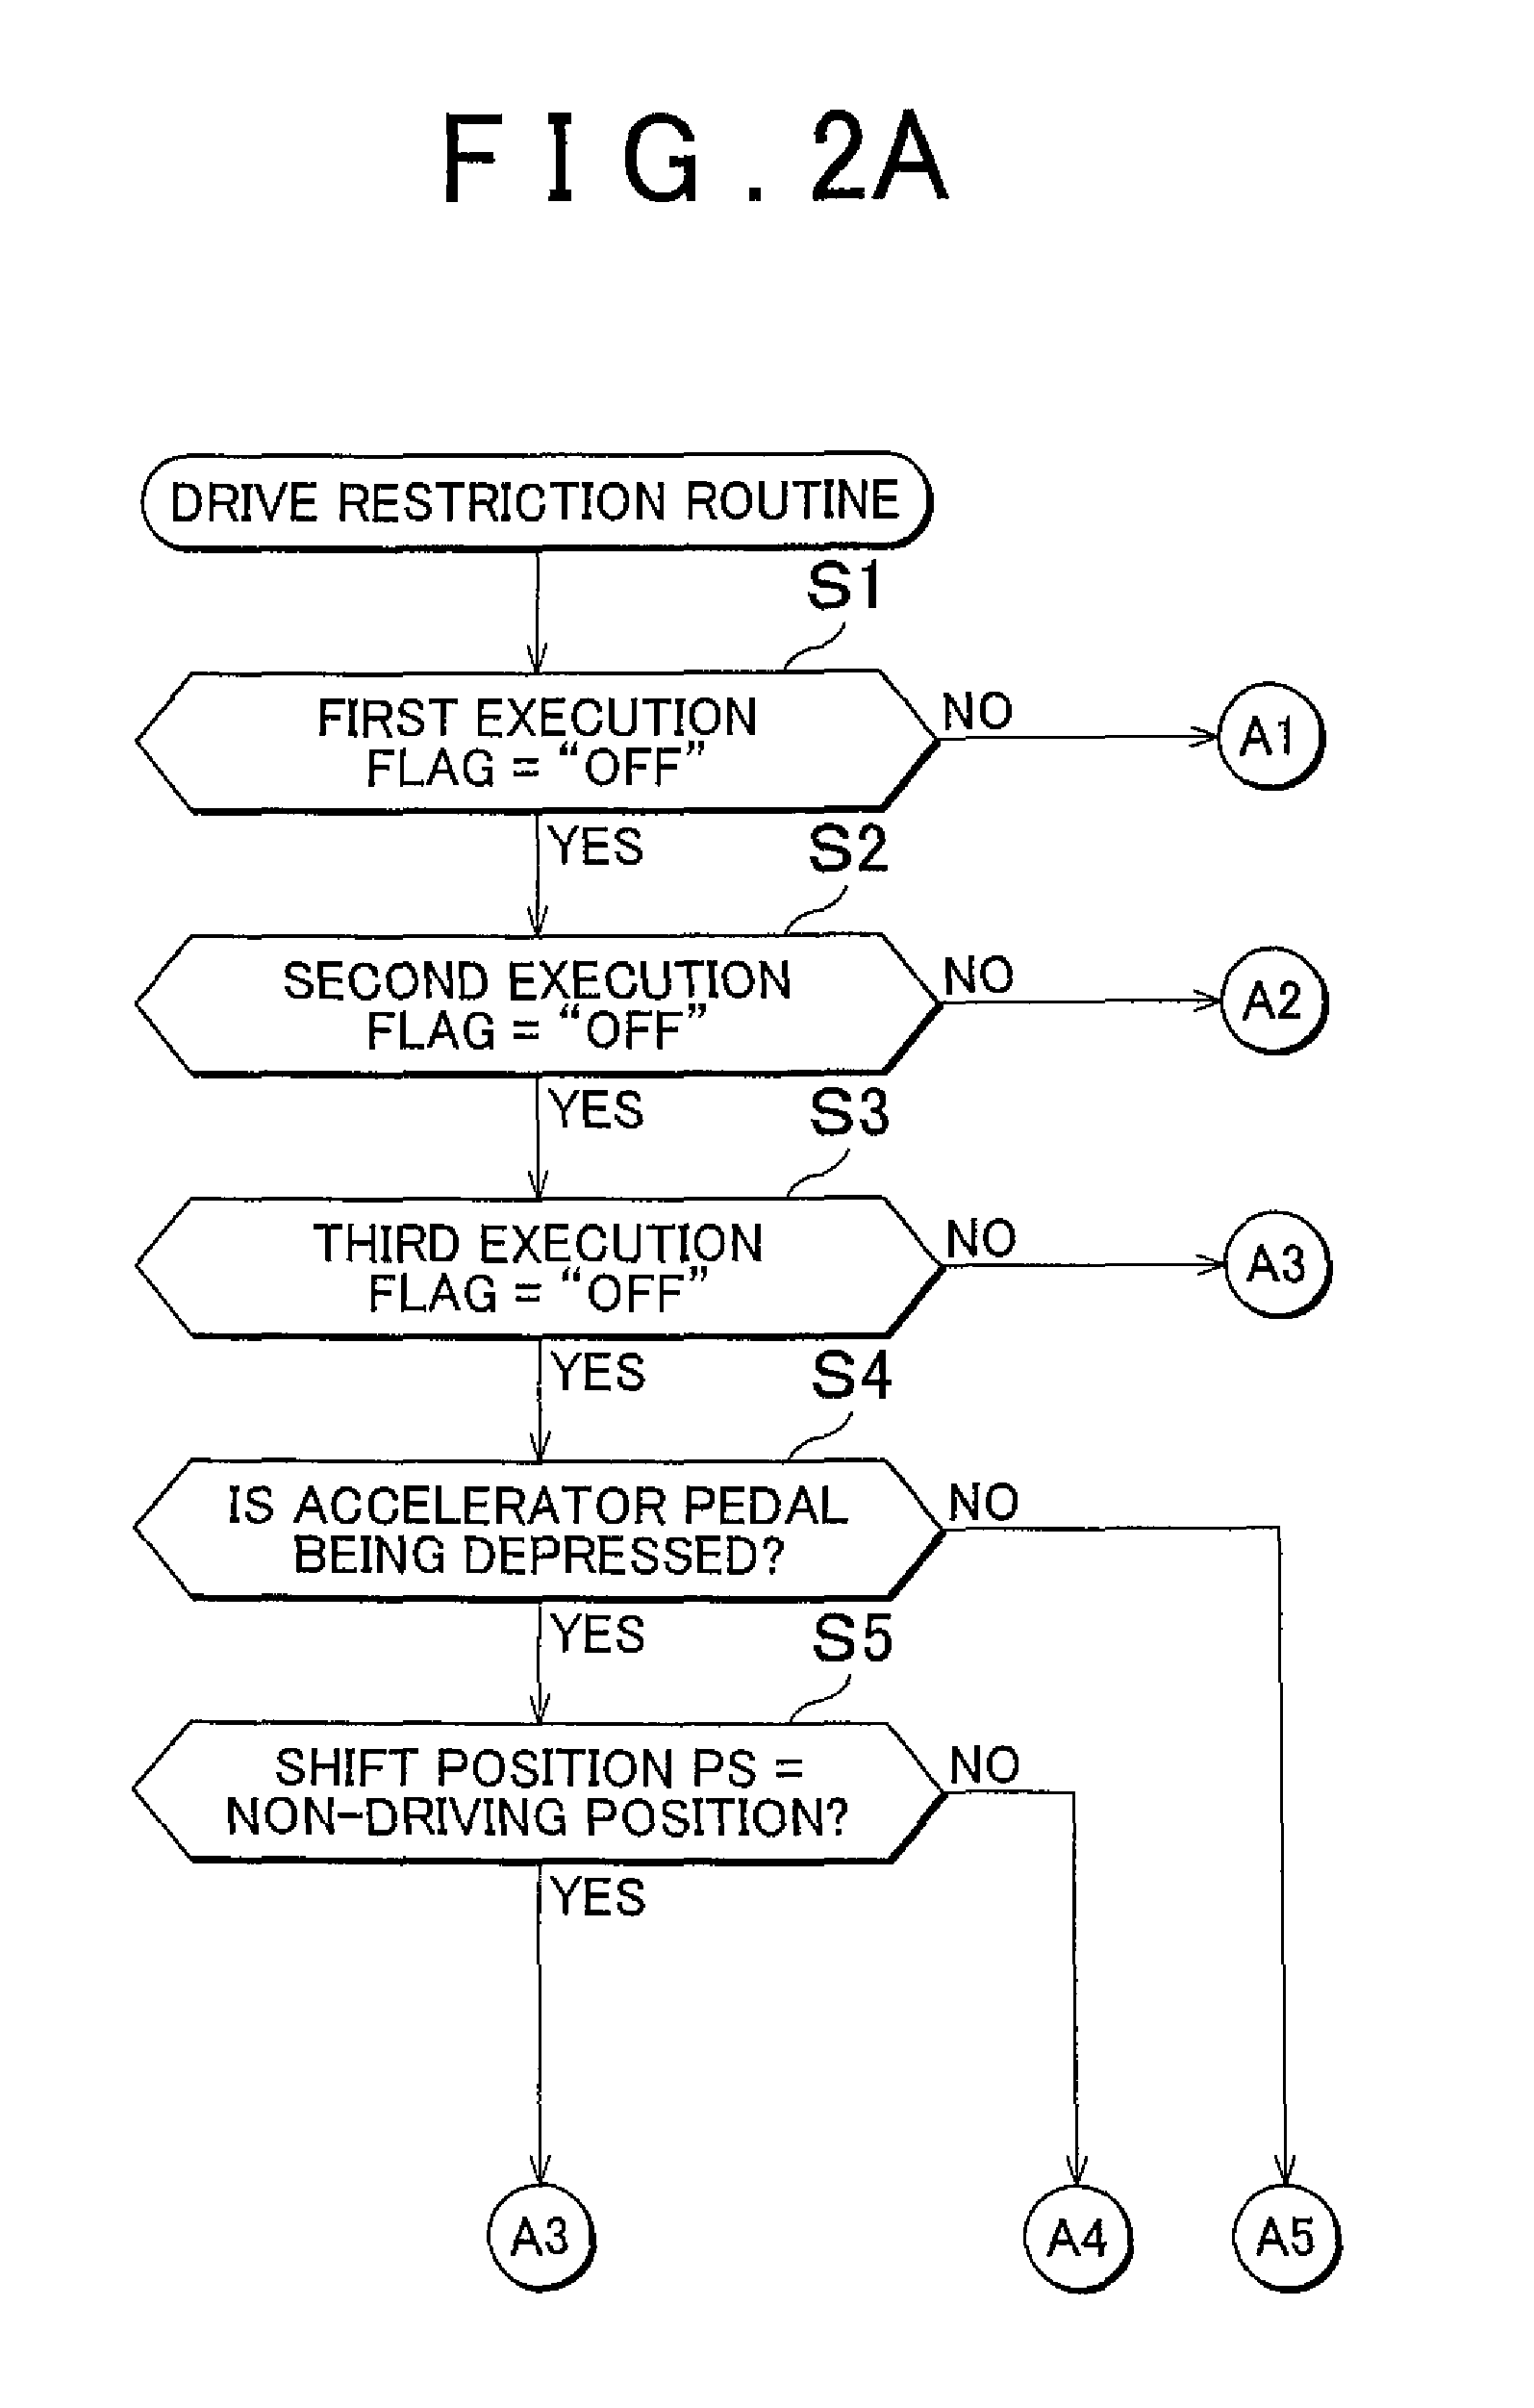 Drive control apparatus for vehicle